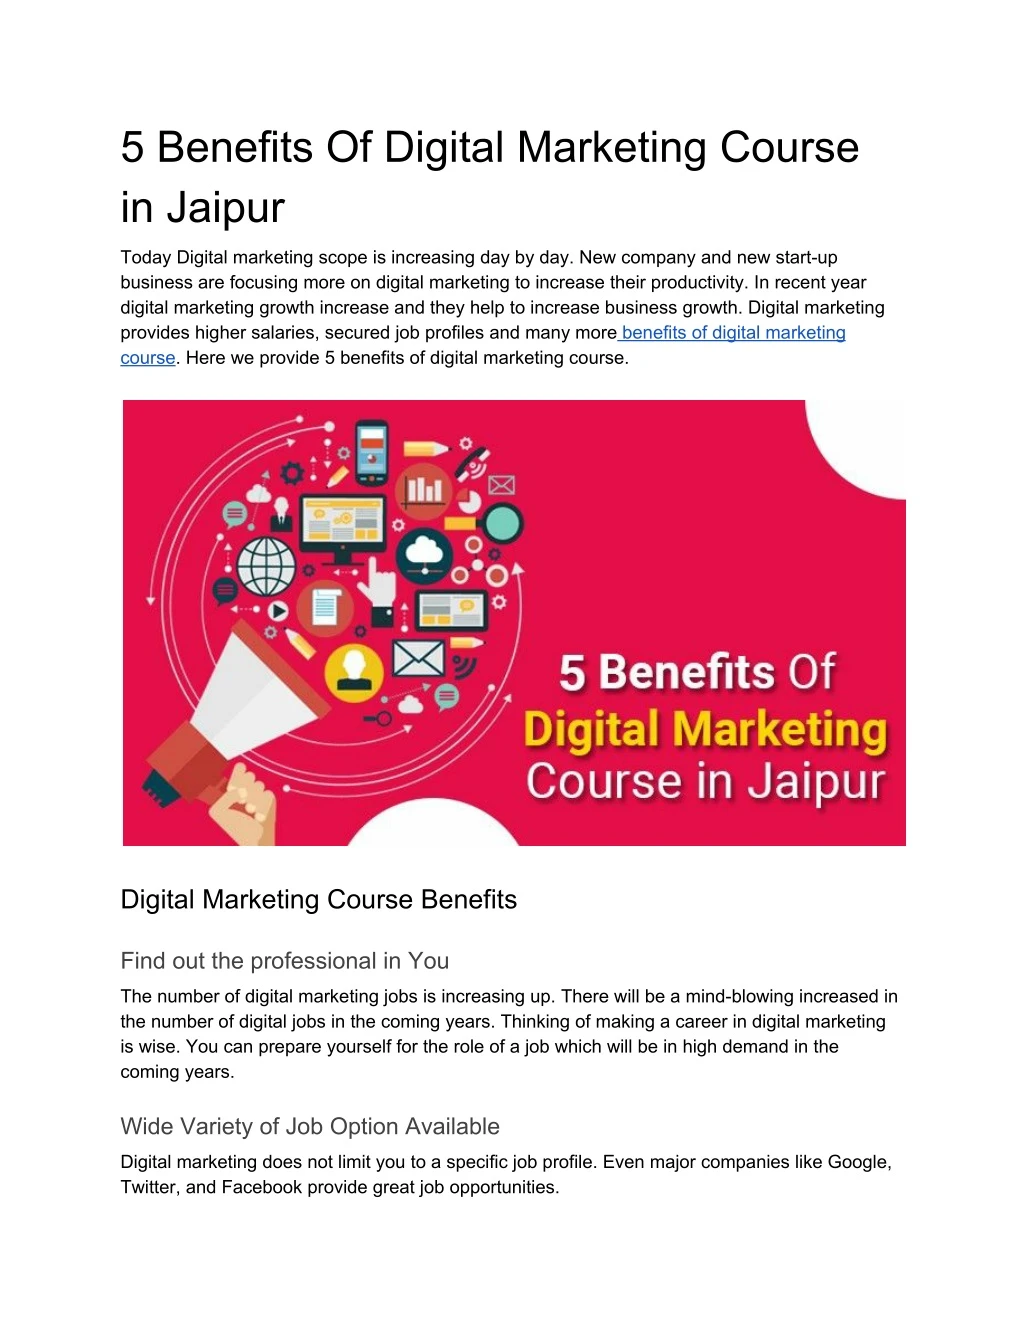 5 benefits of digital marketing course in jaipur